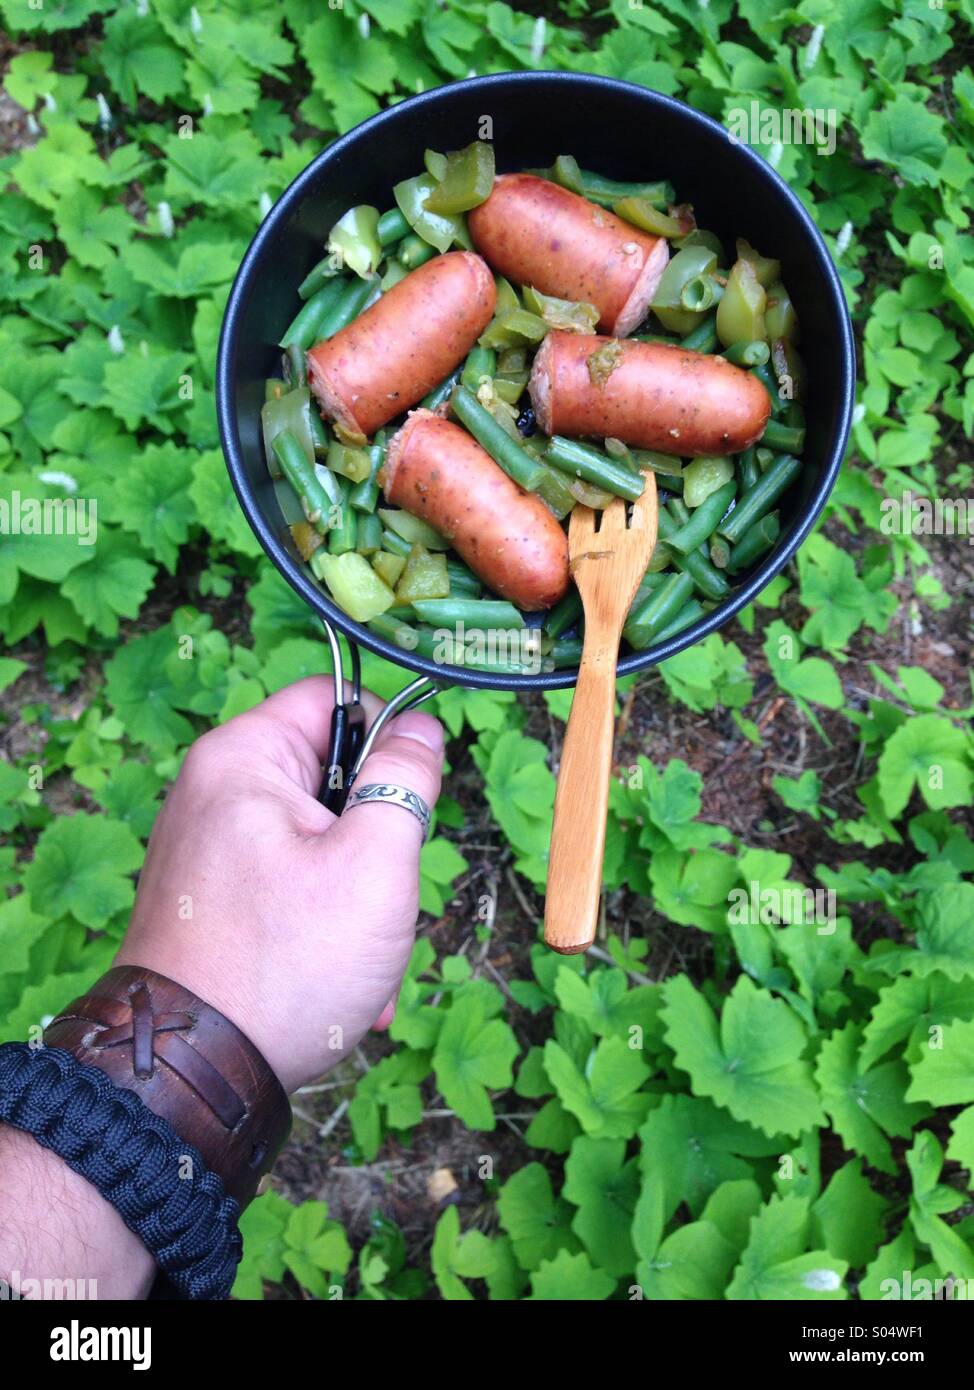 Camp food : Italian sausages and green beans with wild forest greens. Stock Photo